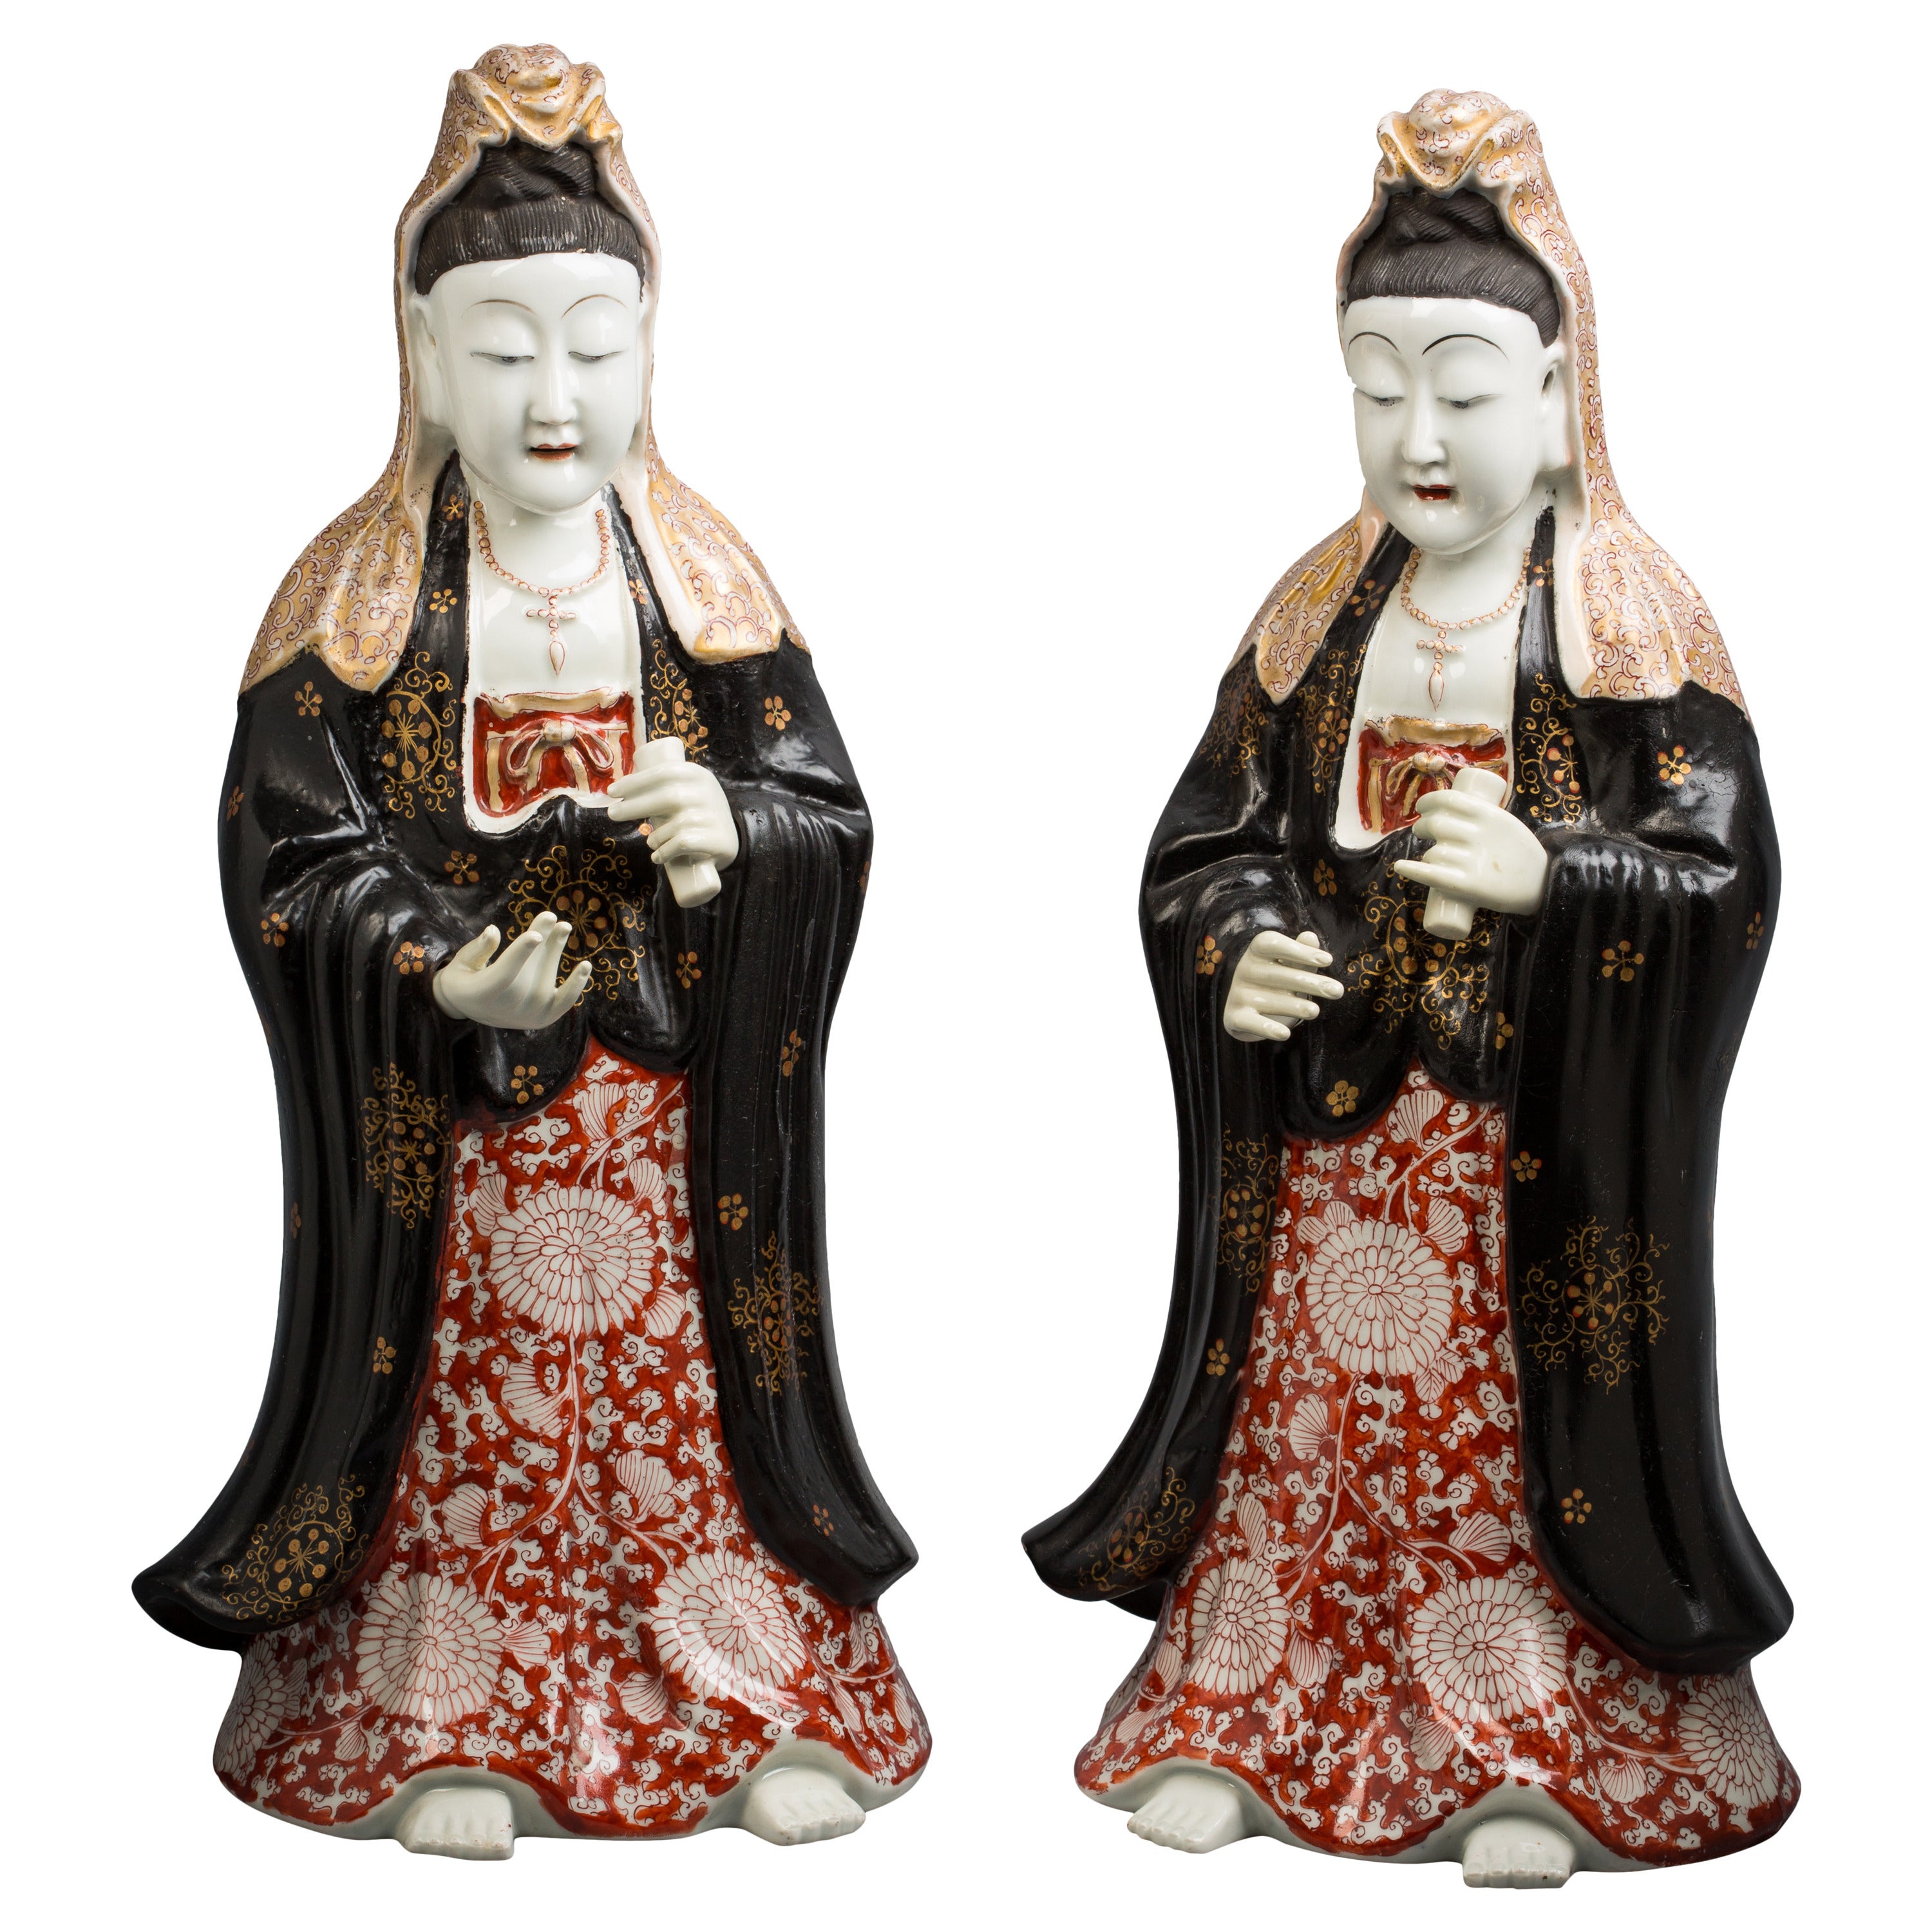 Pair of French Porcelain Chinoiserie Figures, circa 1840